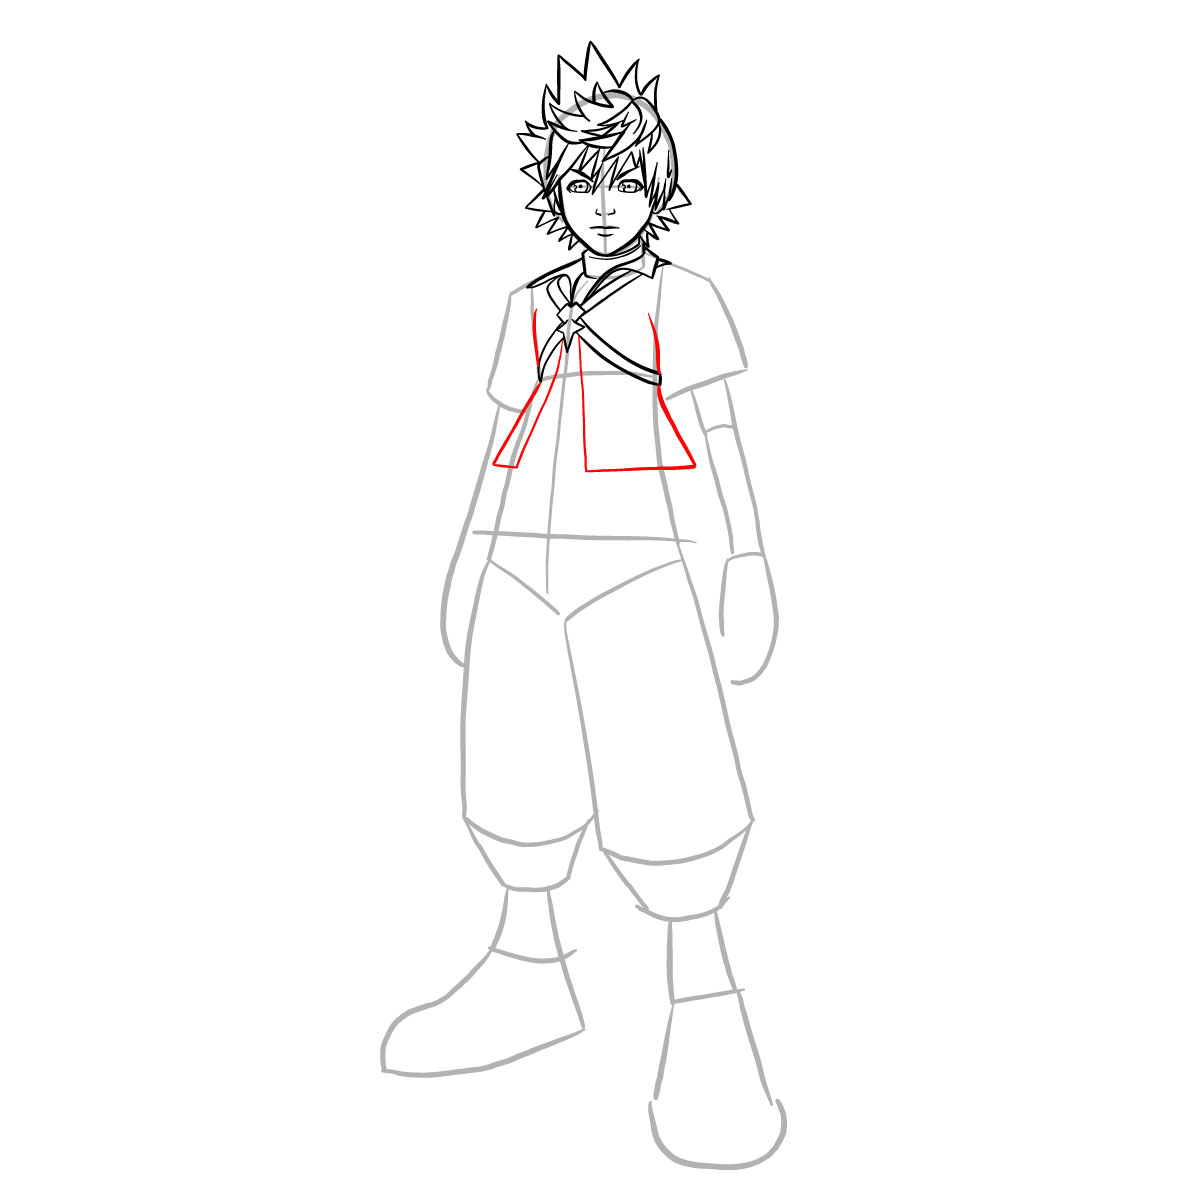 How to draw Ventus - step 21